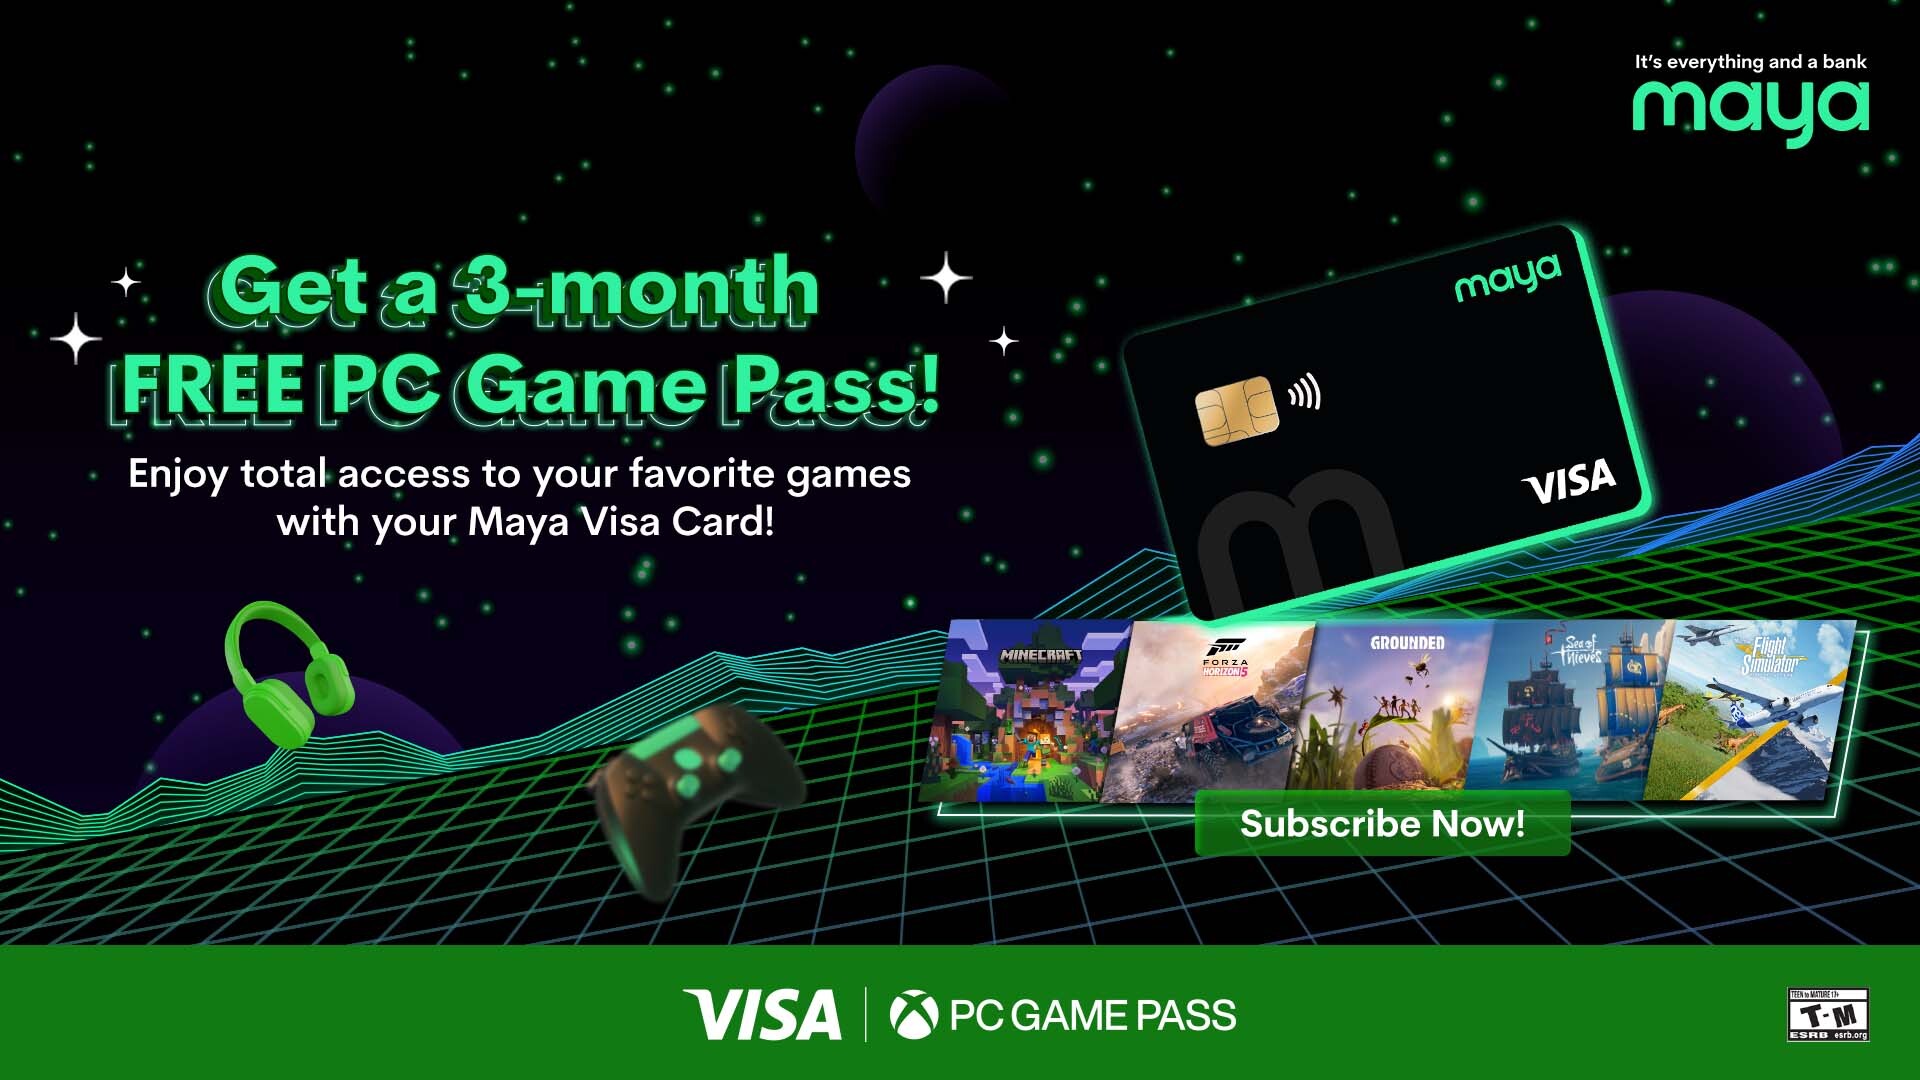 Get a 3 months FREE PC Game Pass subscription with Maya Visa card!